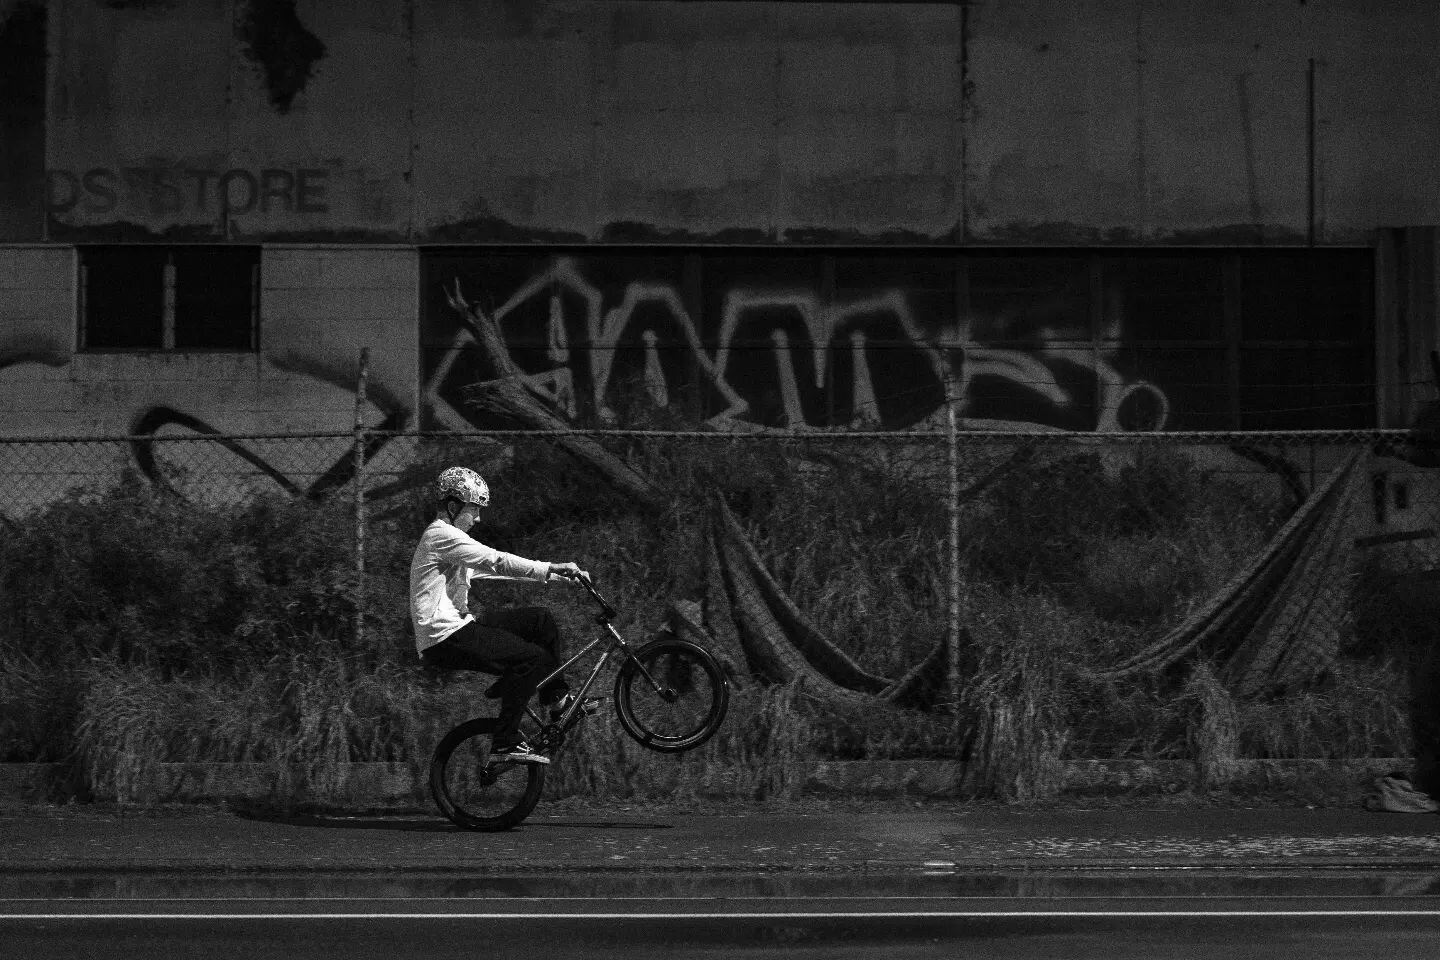 The talents of our man @georgemassie_mtb combined with @twentysix_frames. 

What a result! We love this shot!

#teamdirtside 
#dirtside
#BMX
#streetbmx
#fistbump 
#fistbumpsforlife 
#streetphotography 
#toocool